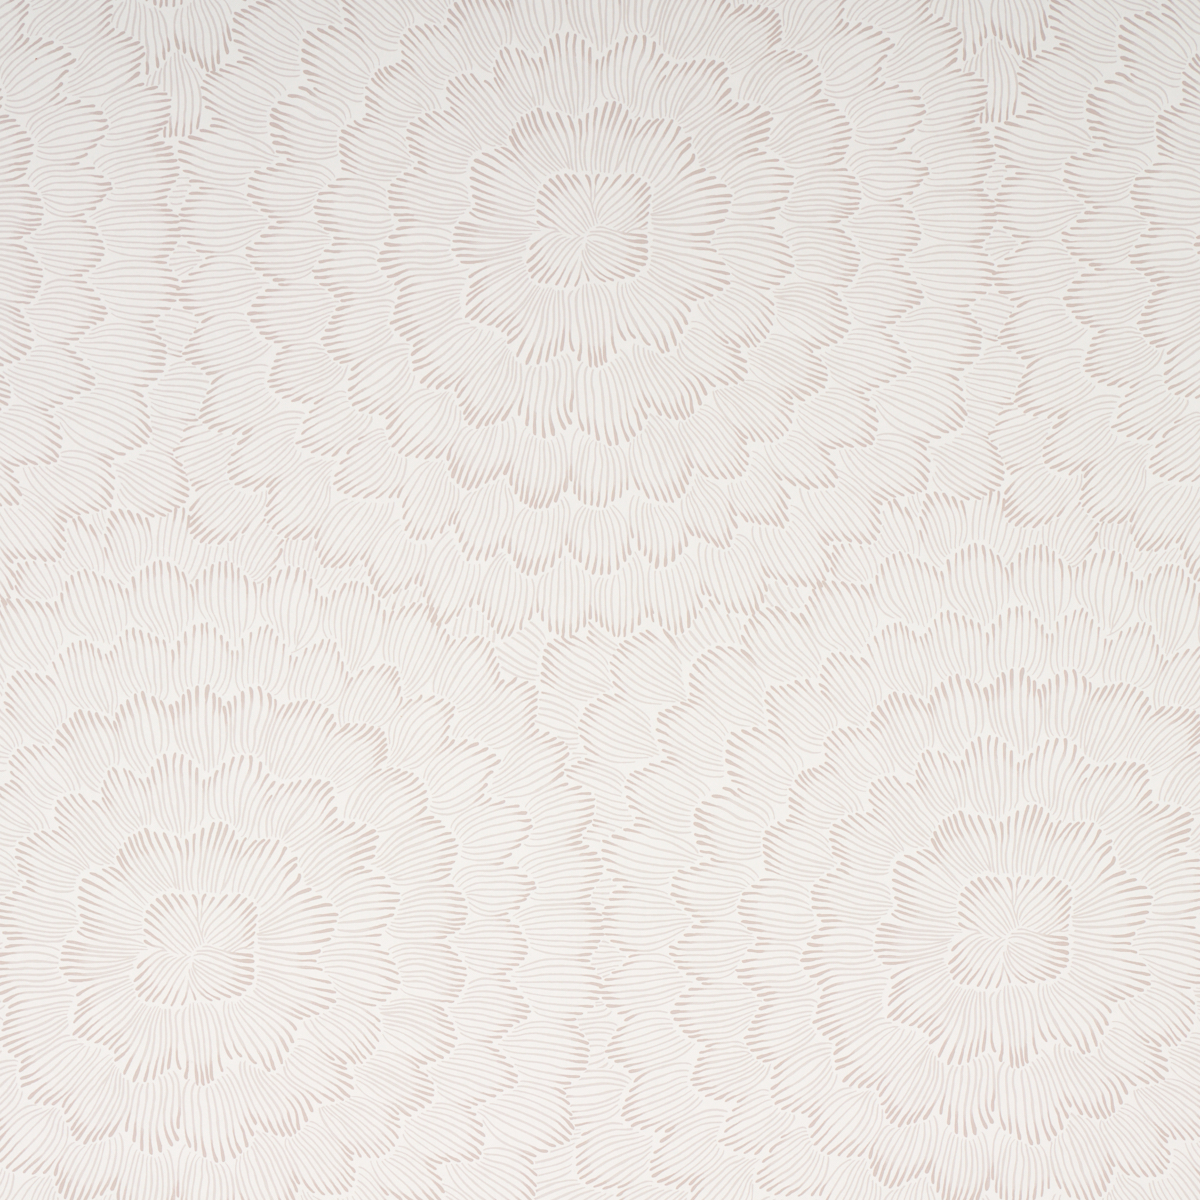 Schumacher Feather Bloom by Celerie Kemble in Soft Neutral - Wallpaper Installation Tips